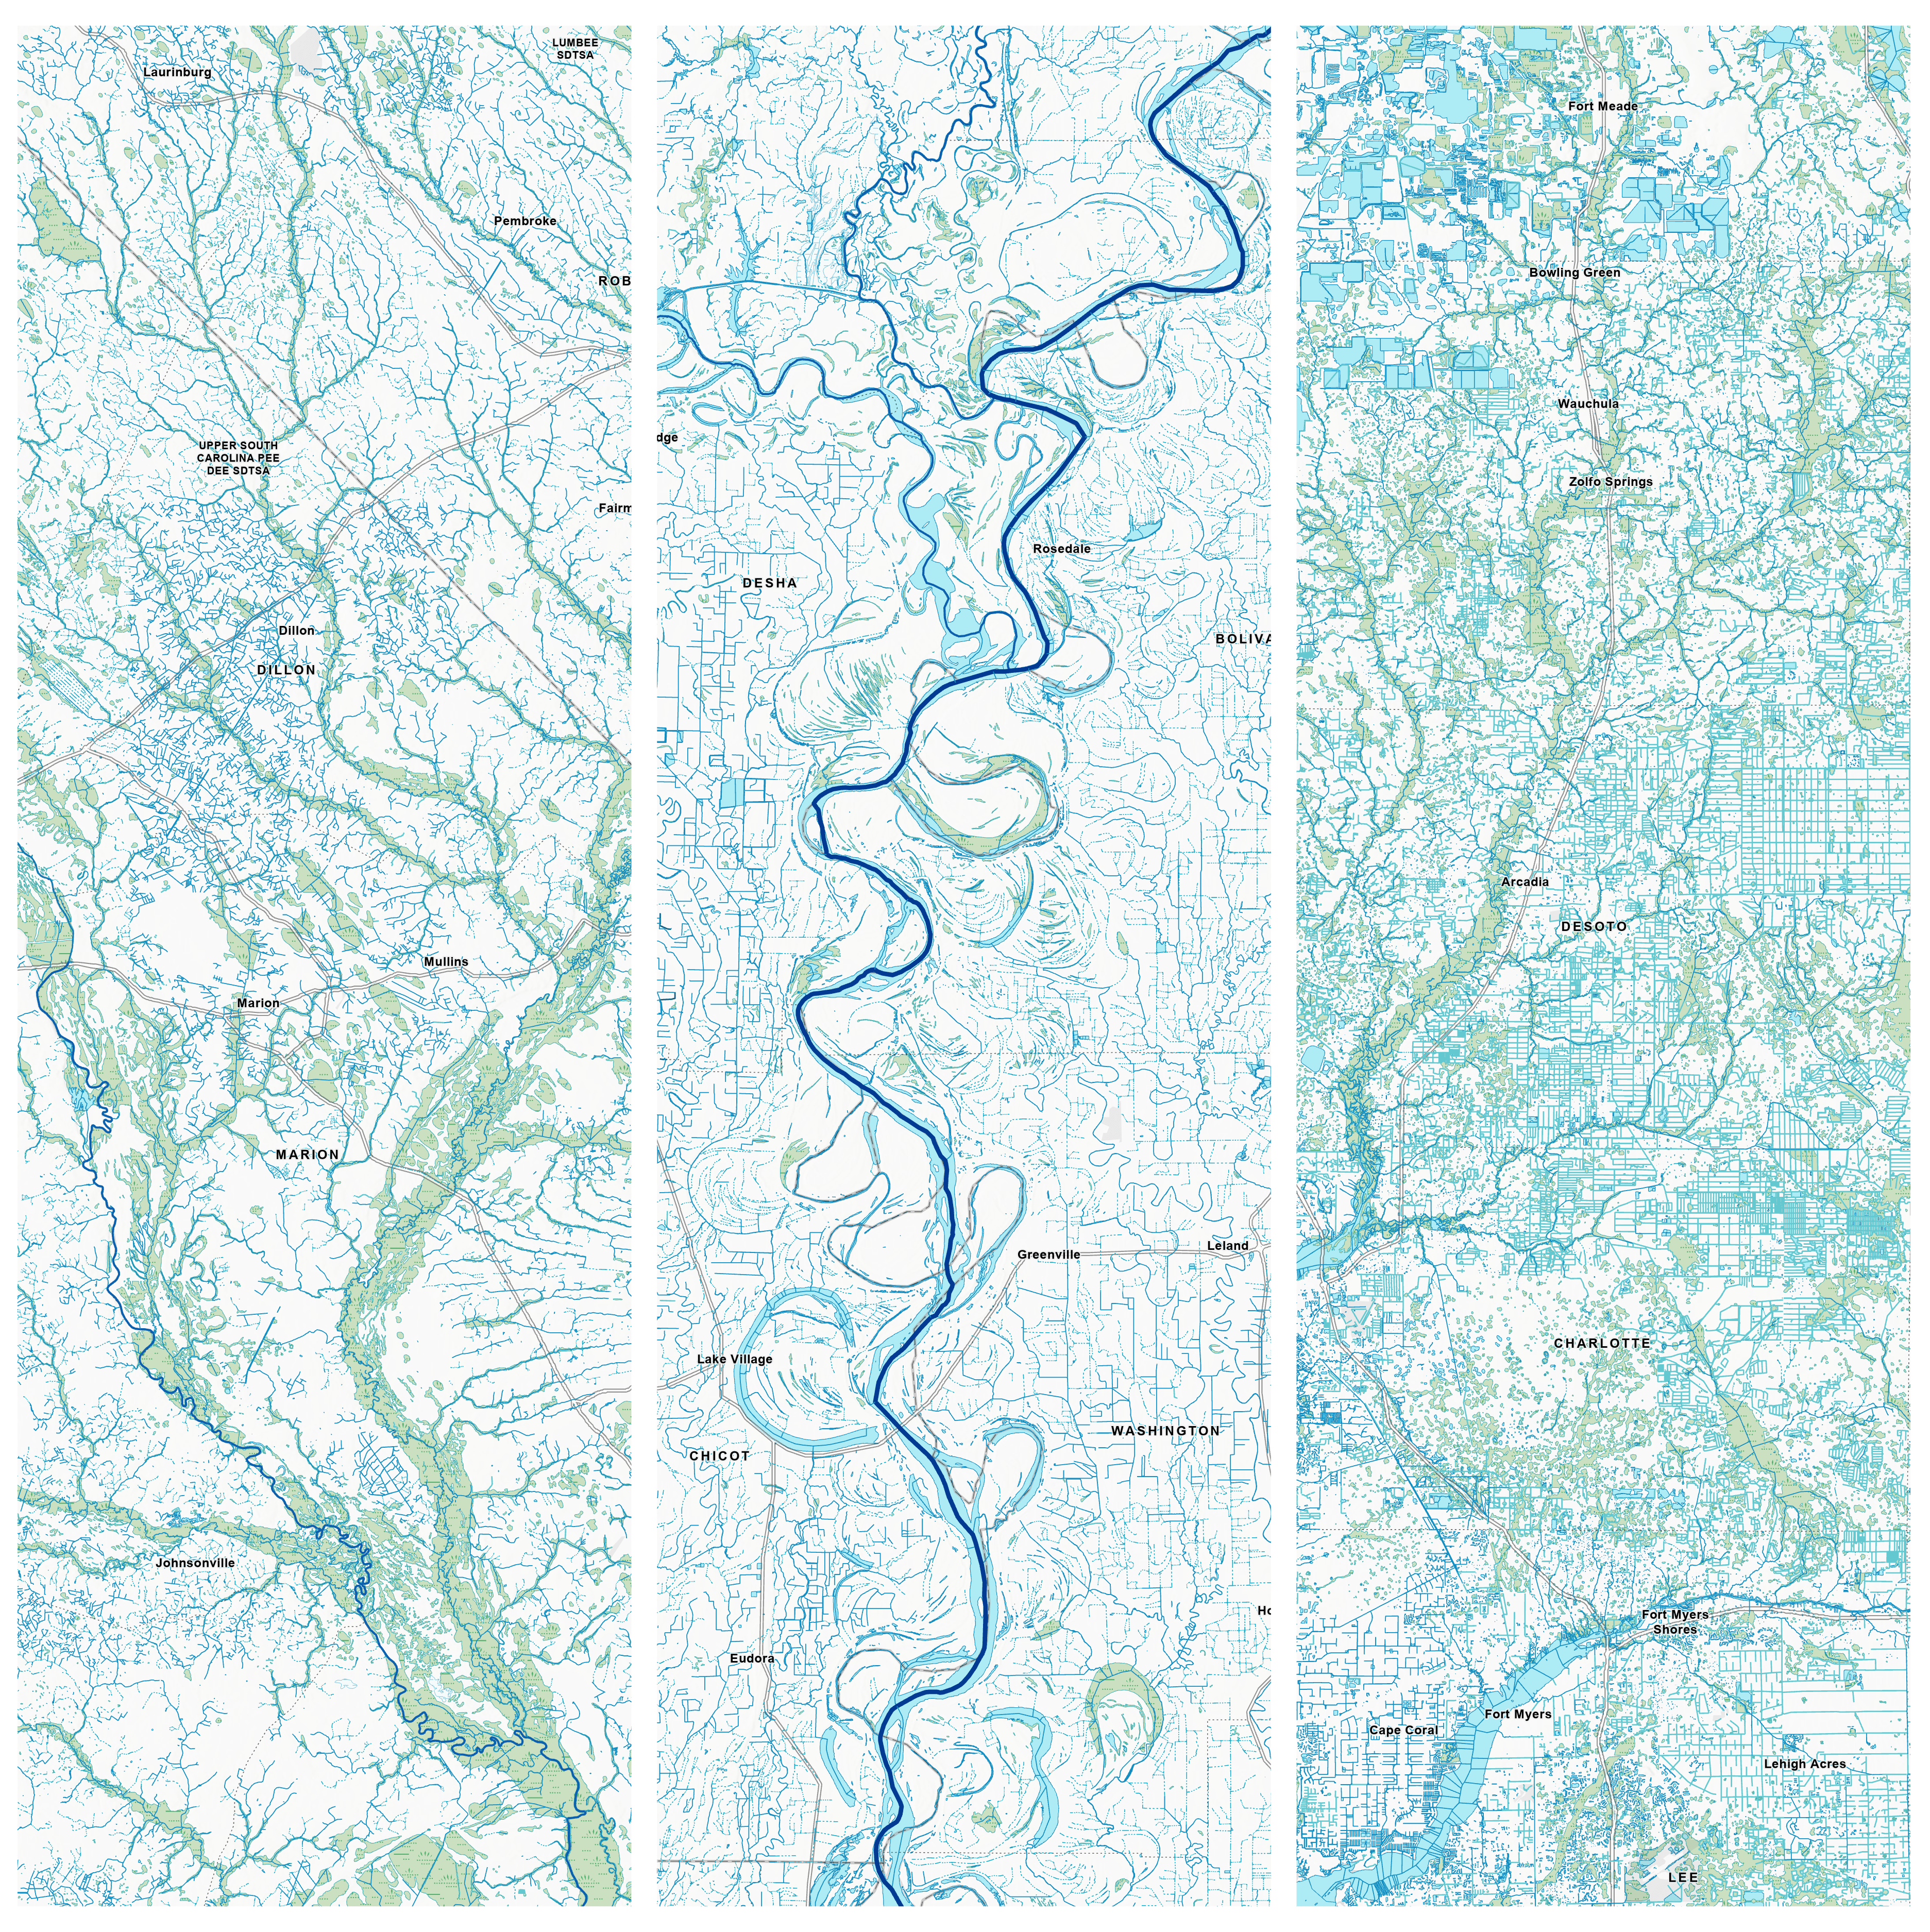 Water shapes the landscapes around us and creates the land forms that we see. On the left we can see the meandering low-gradient rivers and marshes of the coastal plain in South Carolina. In the center image, the oxbow lakes are signs of the Mississippi River's movements over time that create rich farmland along the Arkansas-Tennessee border. On the right, numerous canals reveal the major efforts humans have made to control the distribution and movement of water along the gulf coast of Florida.